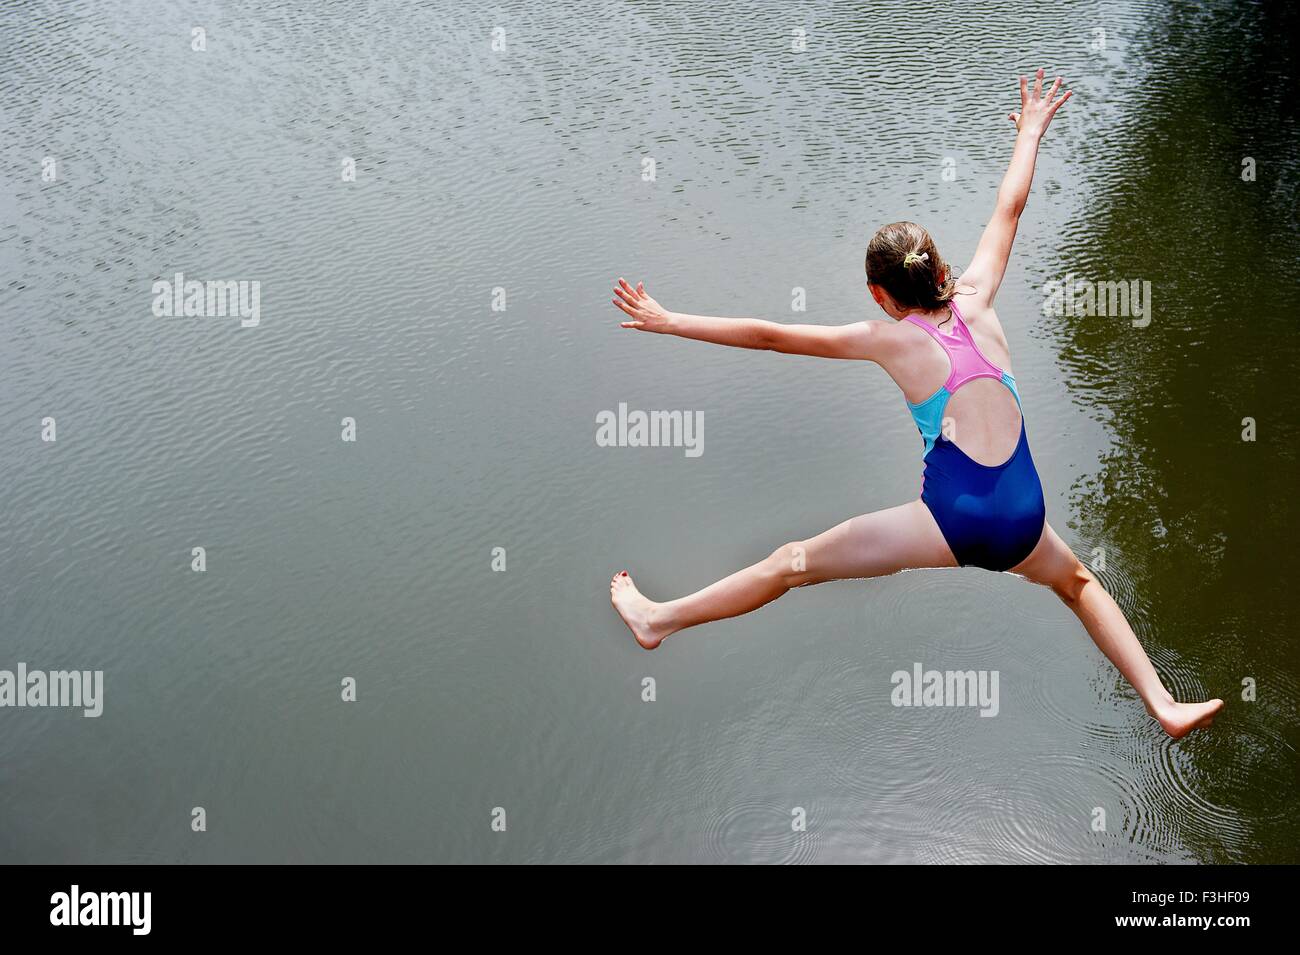 Overhead view of girl jumping into lake Stock Photo